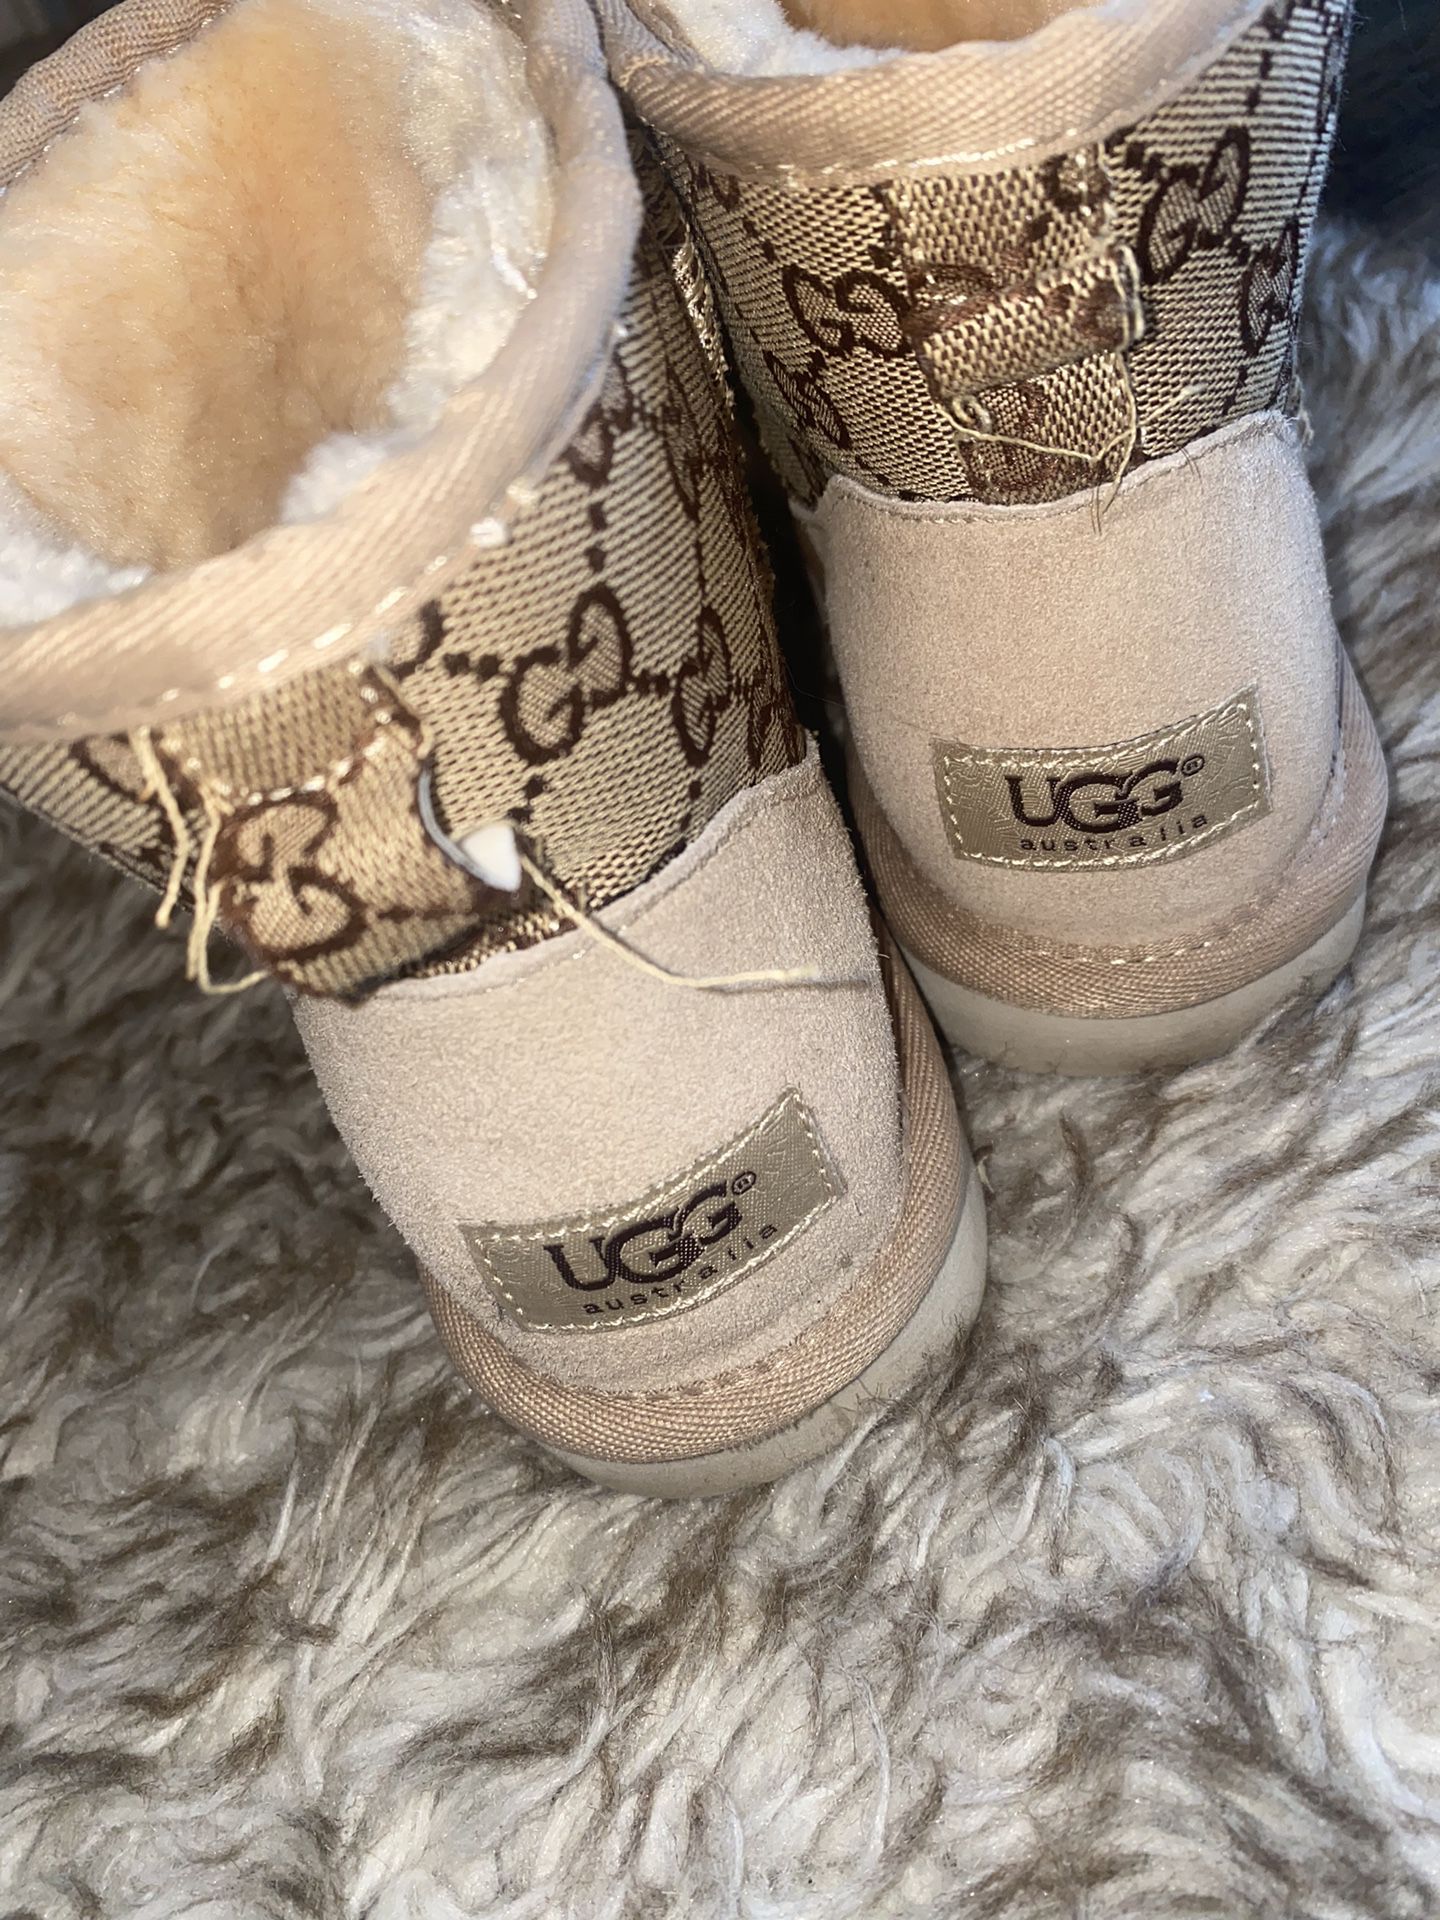 Woman Ugg Boots for Sale in Miami, FL - OfferUp